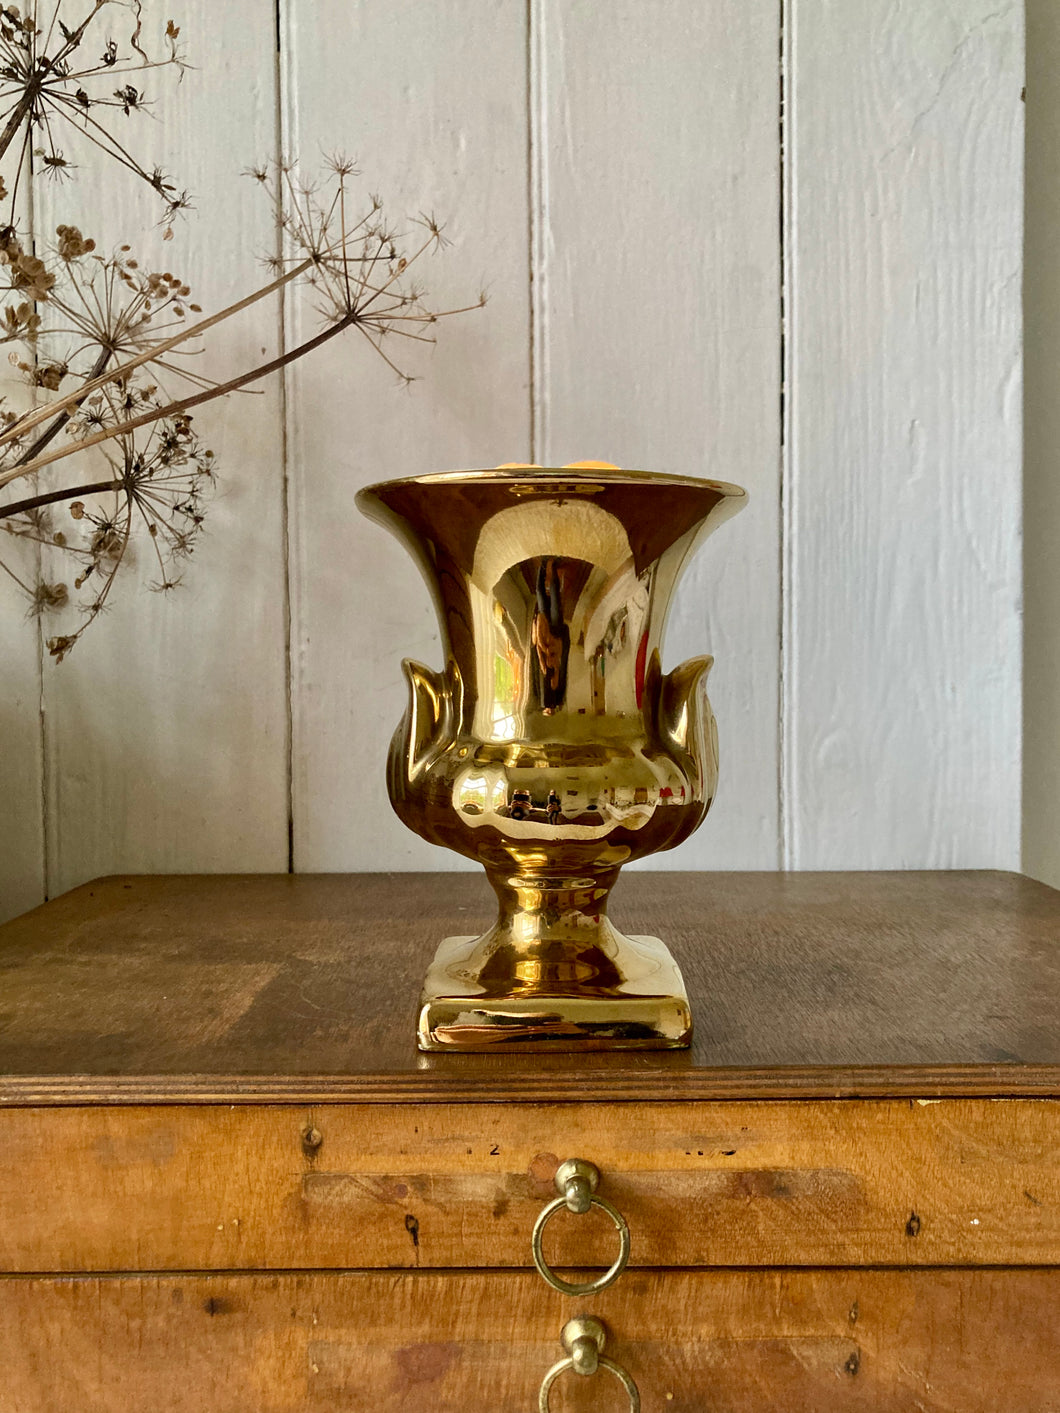 Classical style gold china urn or vase